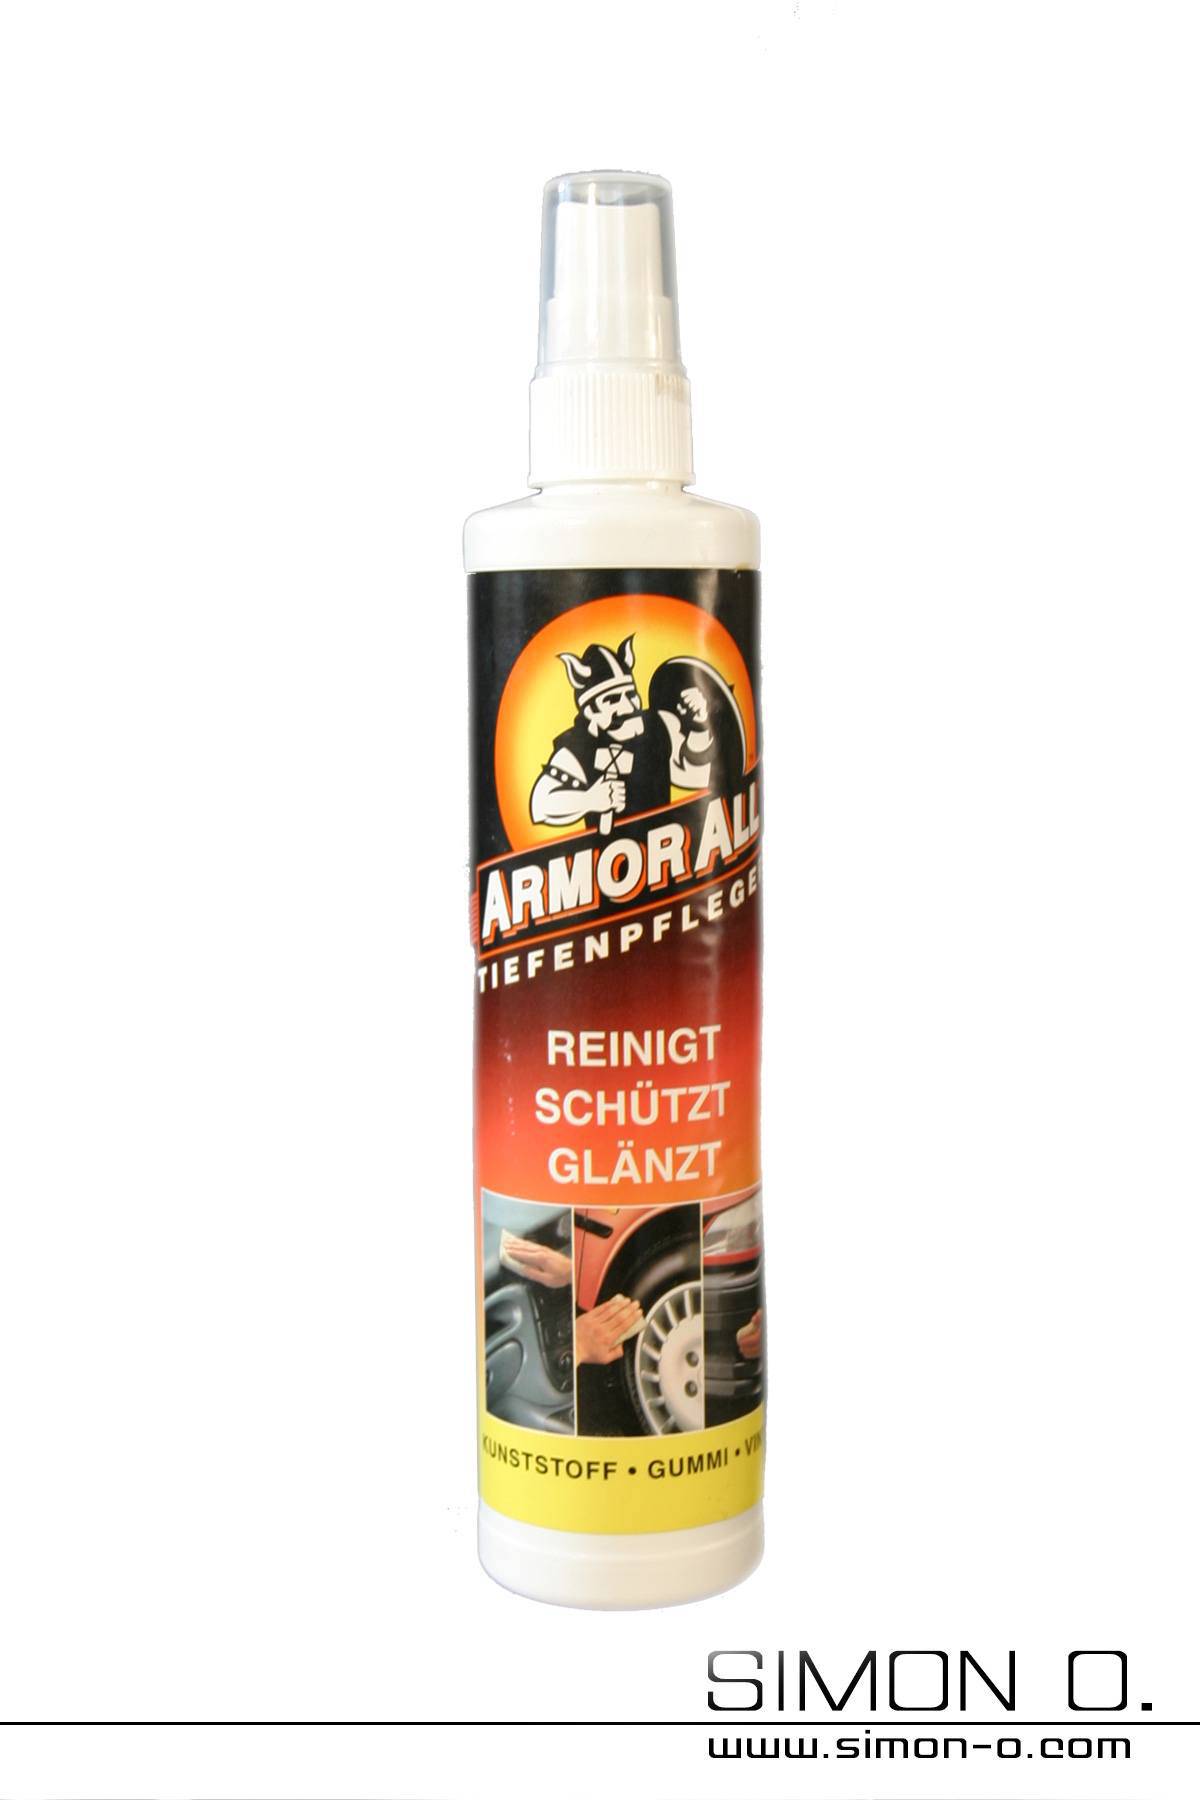 A bottle for latex care with pump spray head with Amor All label